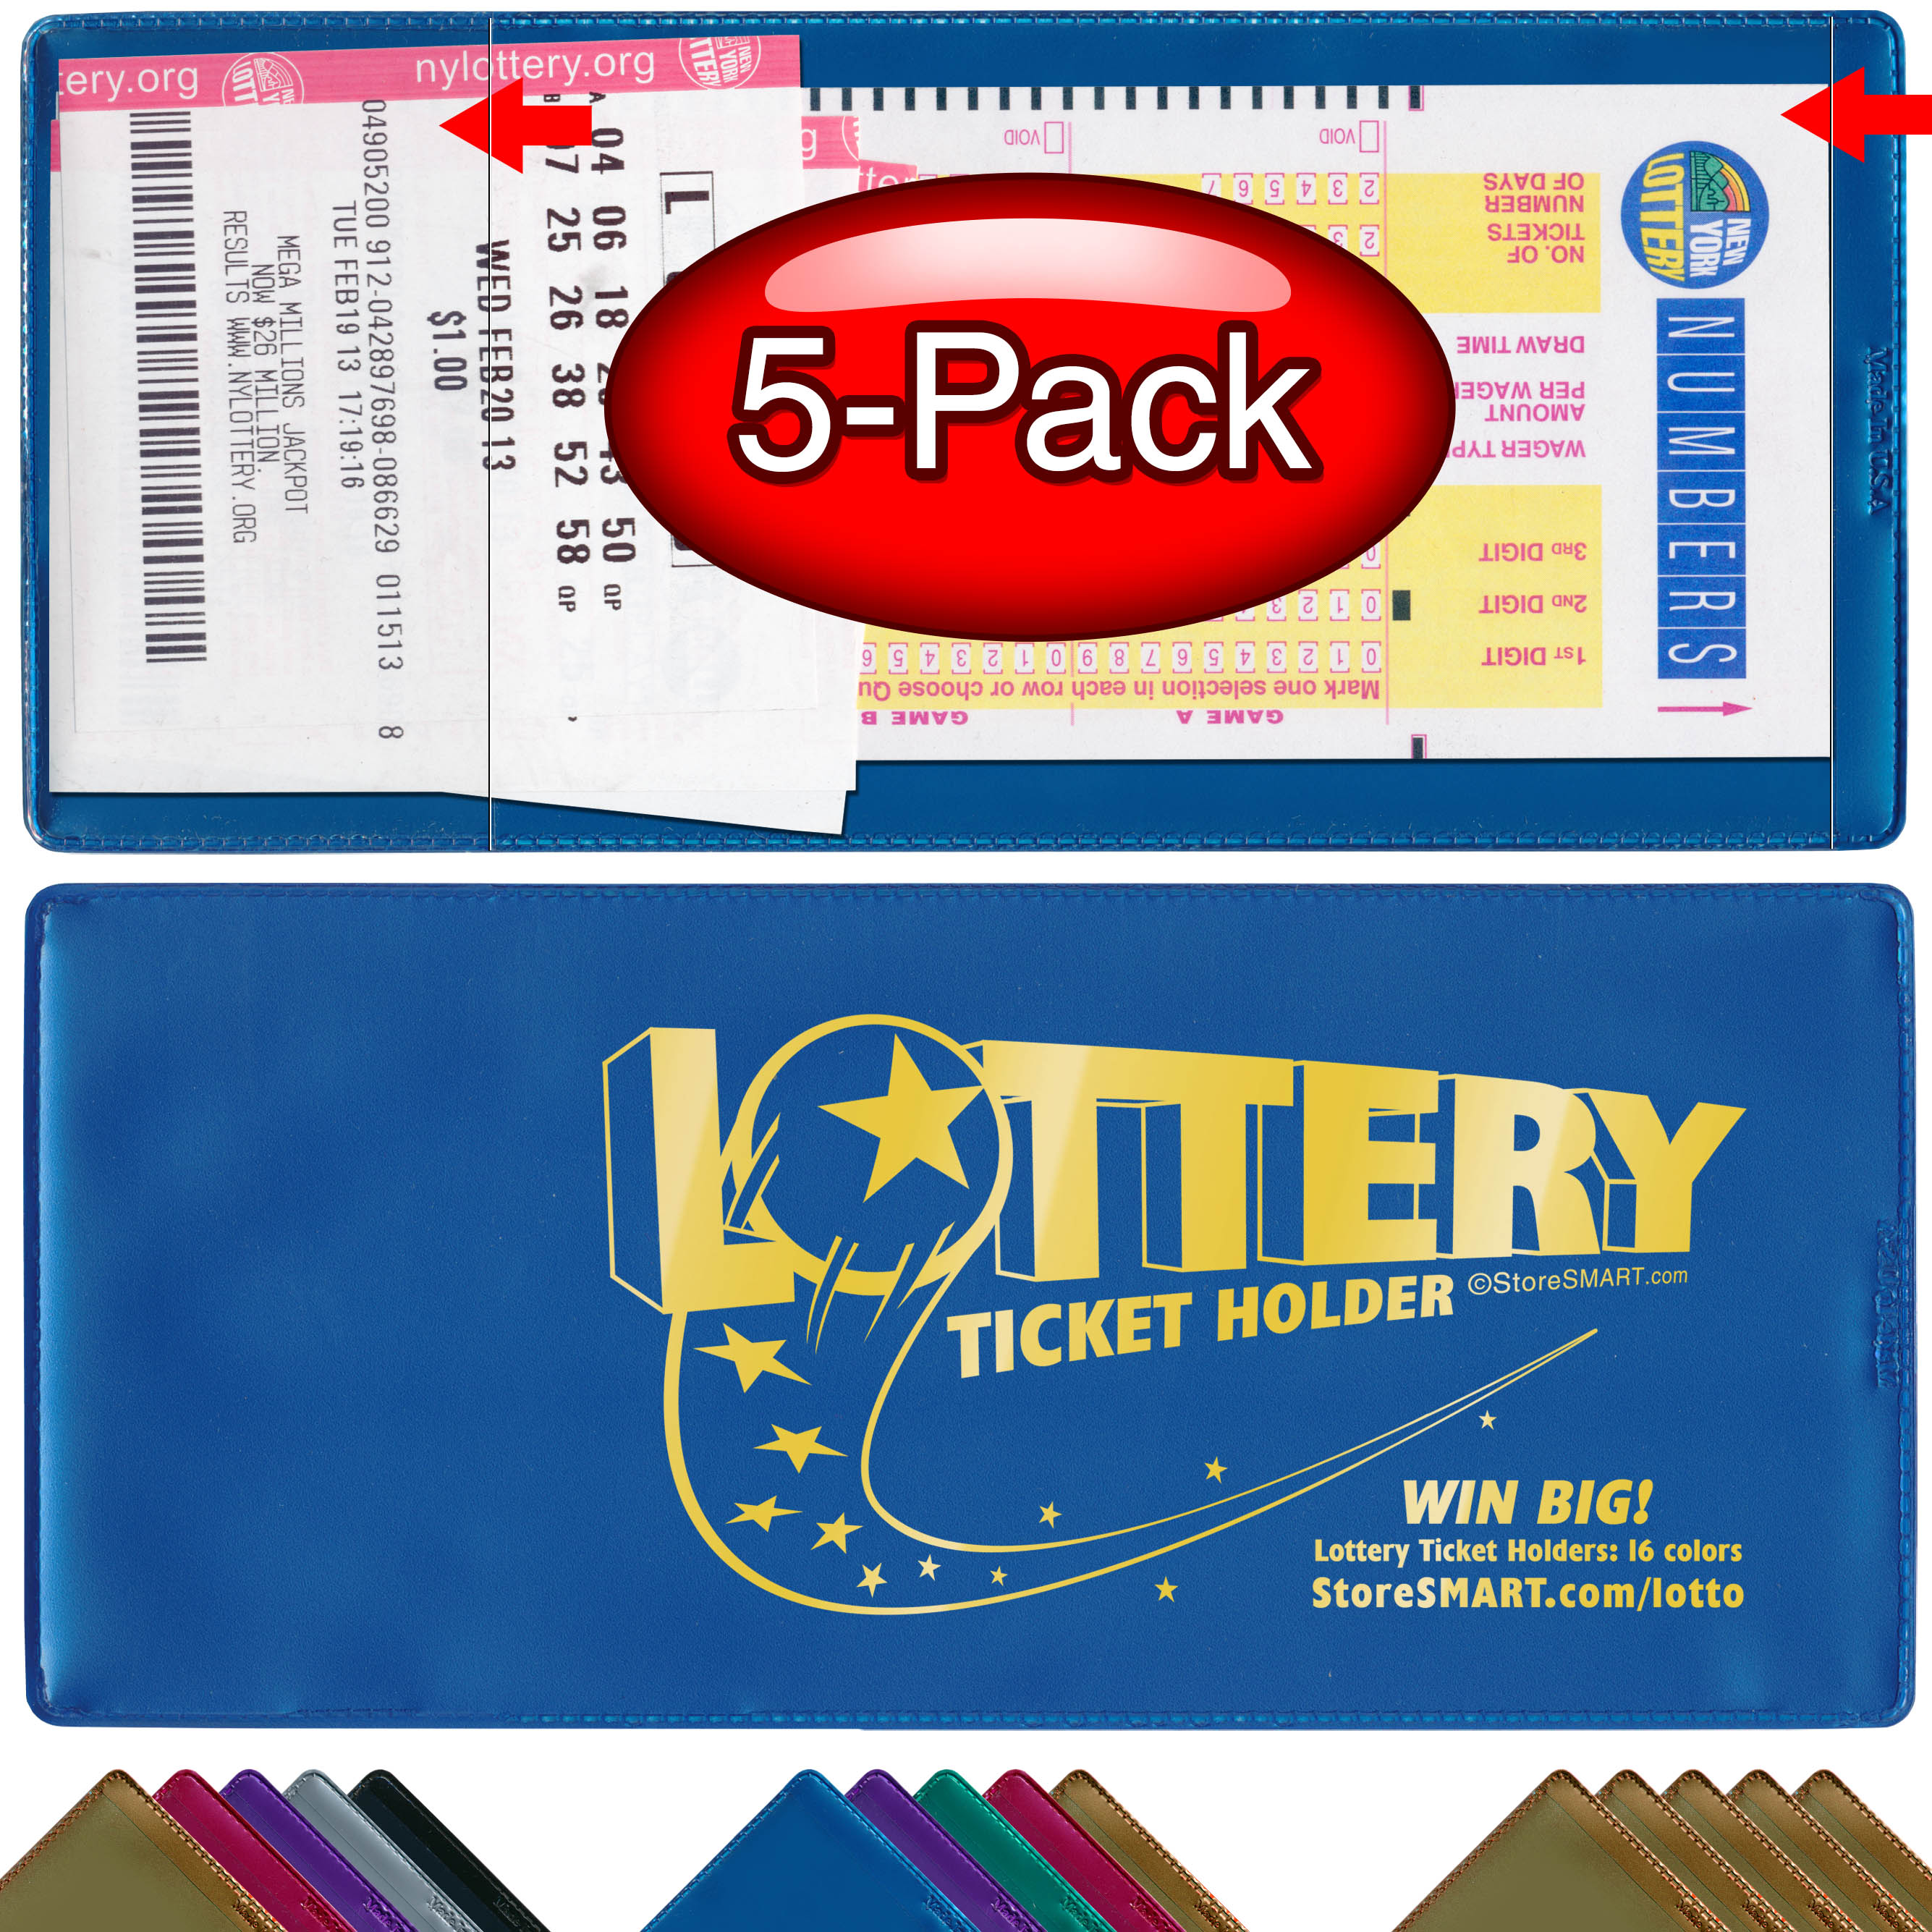 10 Pcs Lottery Ticket Holders, 4.3 x 9.45 Inches Lotto Ticket Holders with  Business Card Pocket, Plastic Ticket Holders, with Lottery Ticket Scratcher